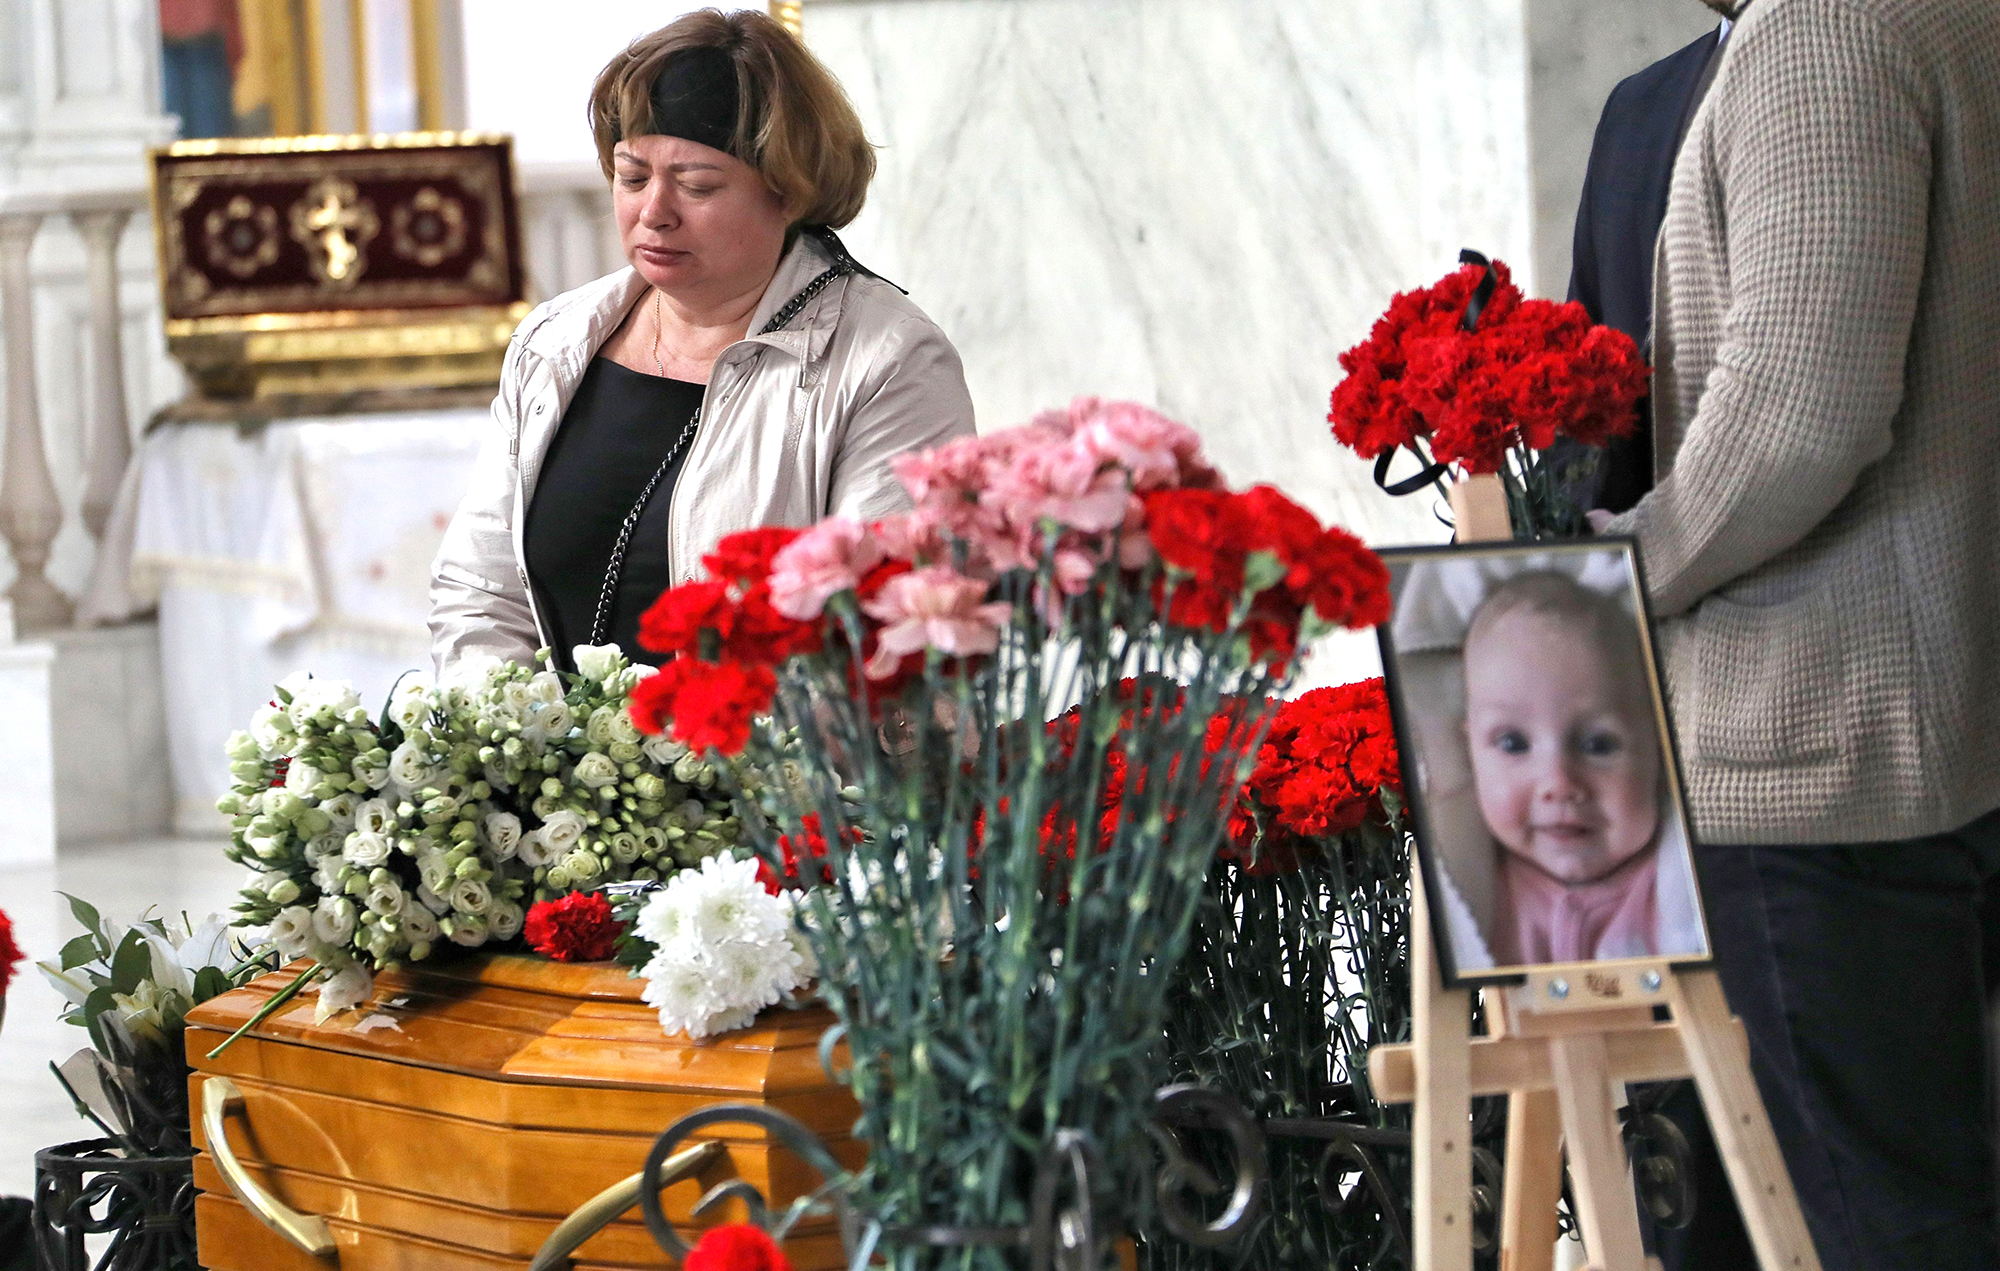 ODESA, UKRAINE - APRIL 27, 2022 - Relatives and friends attend the funeral service of Valeriia Hlodan, her three-month-old baby girl Kira and her mother Liudmyla Yavkina at Transfiguration Cathedral, Odesa, Ukraine, on April 27.